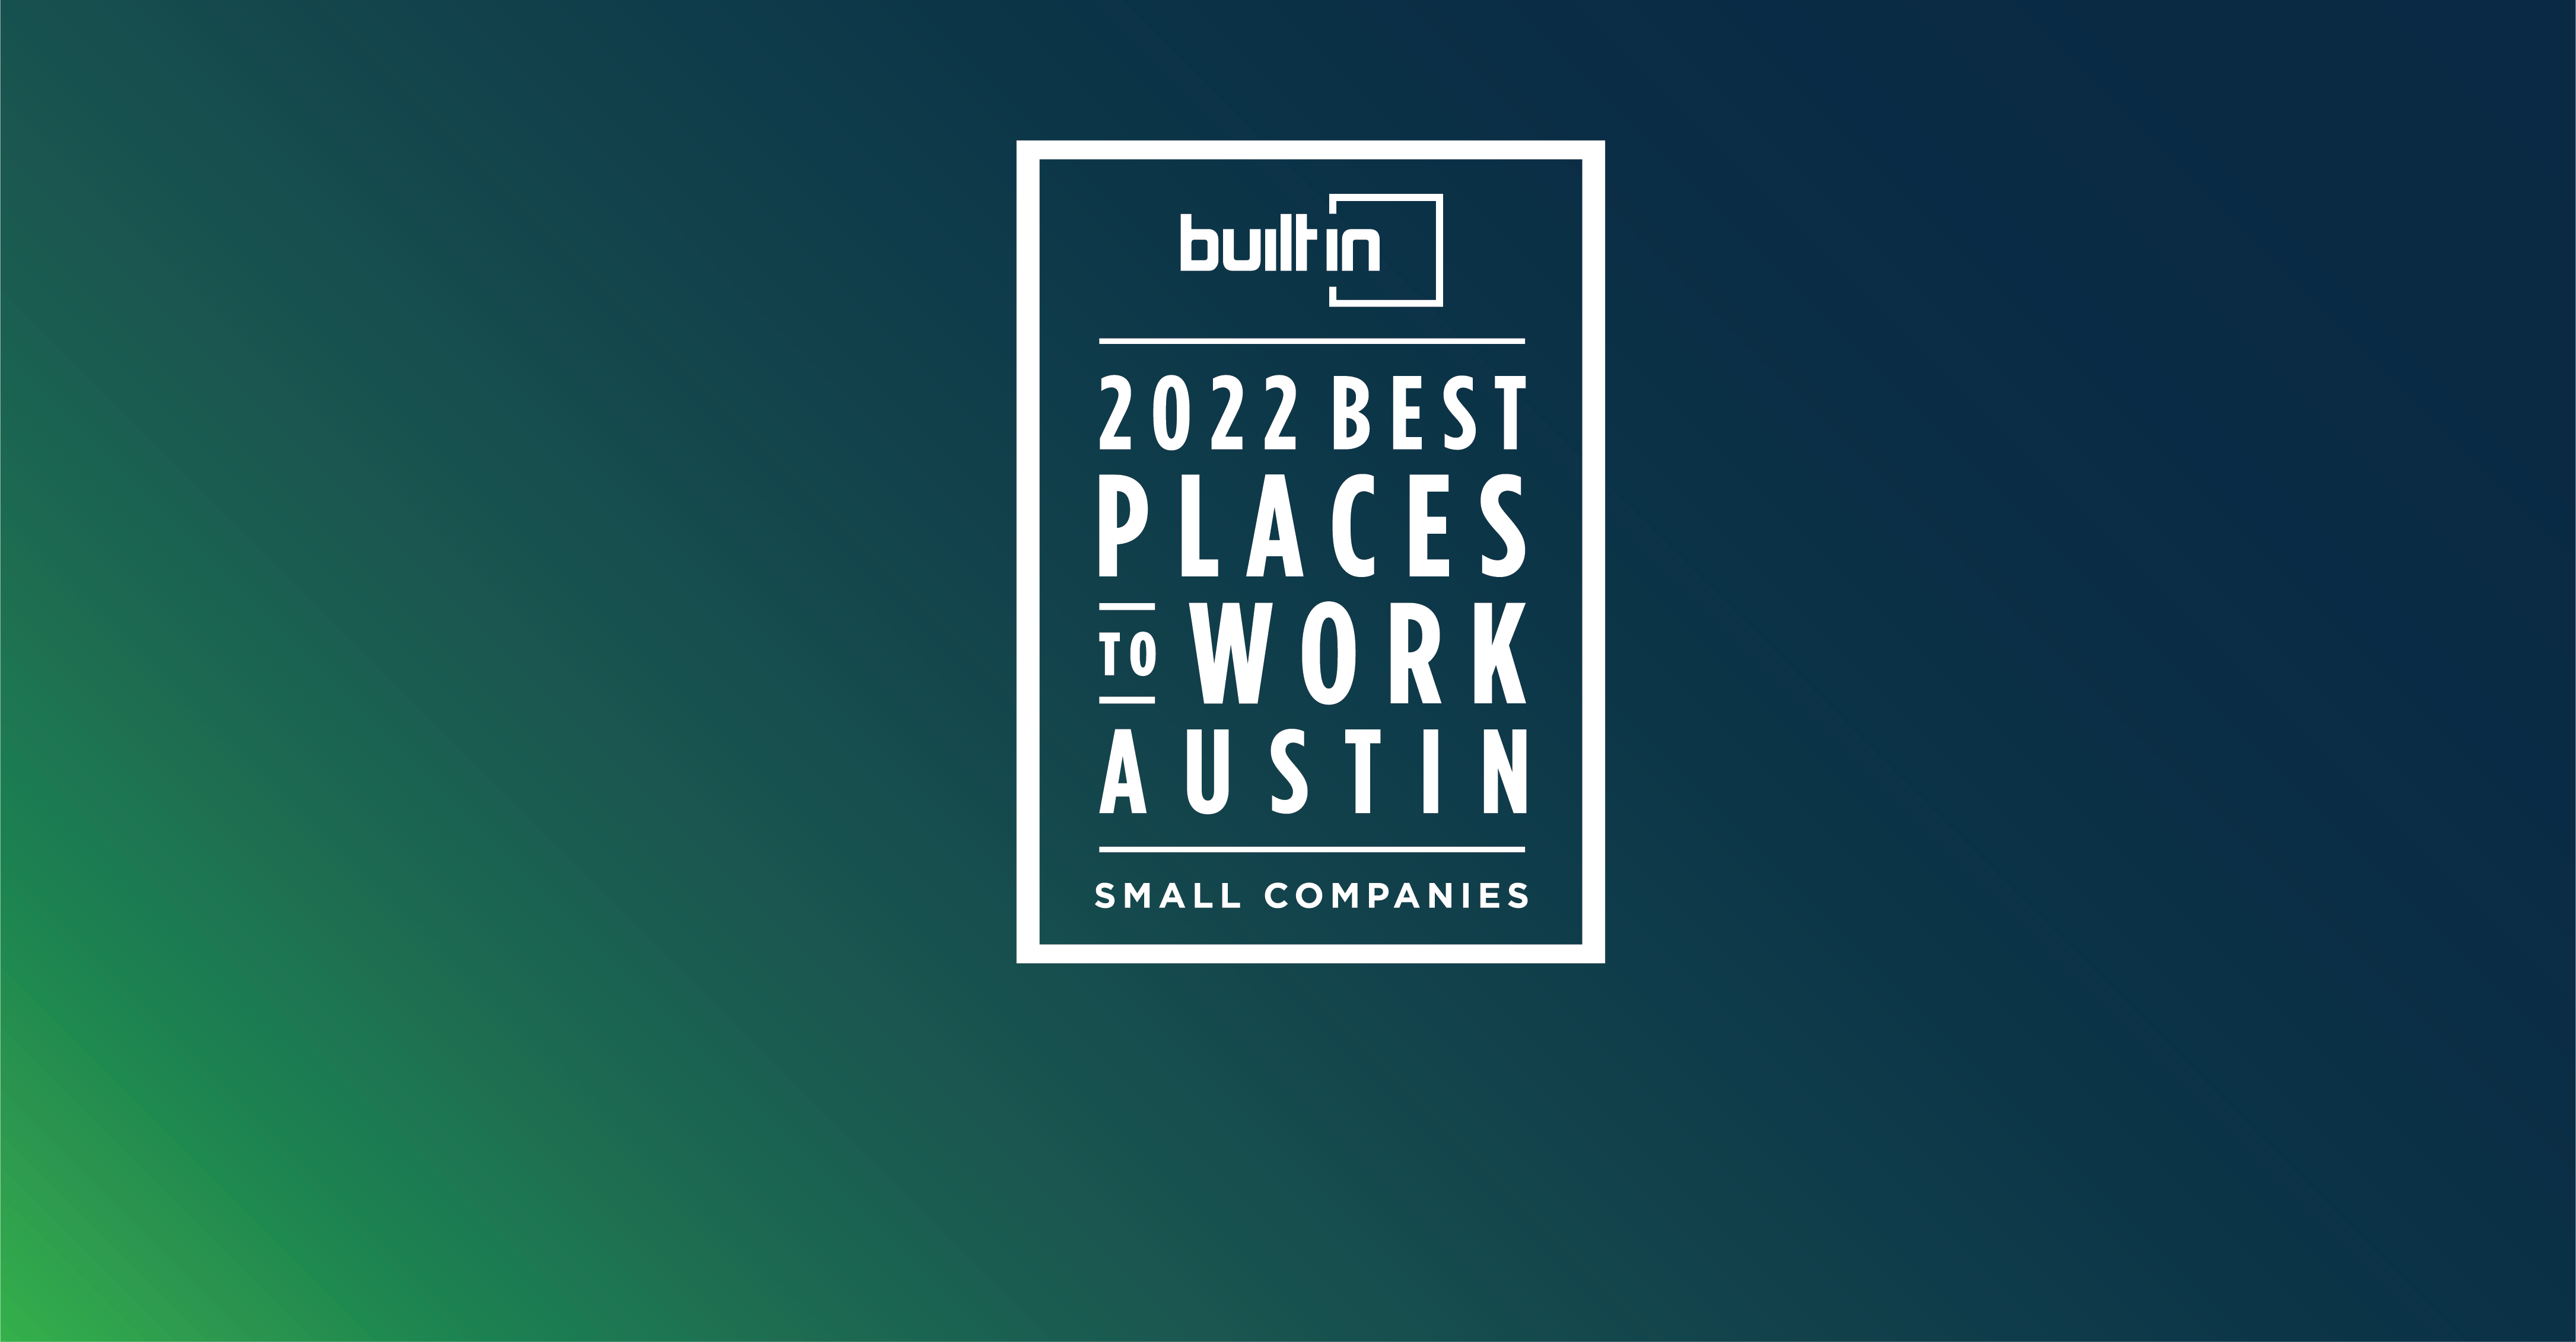 Built In Honors ePayPolicy in Its 2022 Best Places To Work Awards